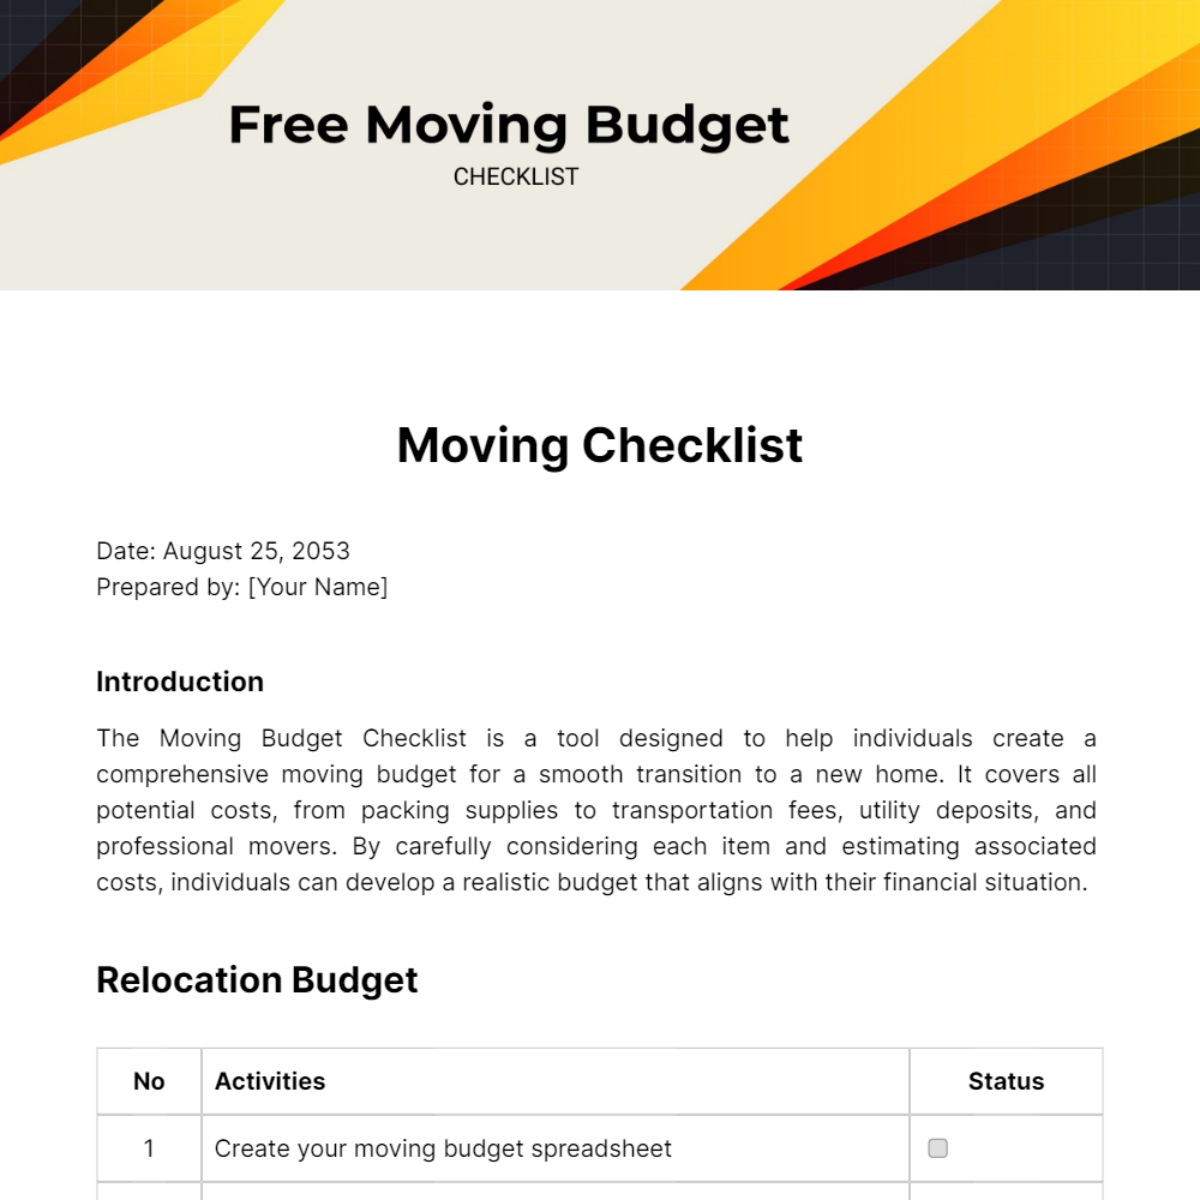 Free Moving Budget Checklist Template